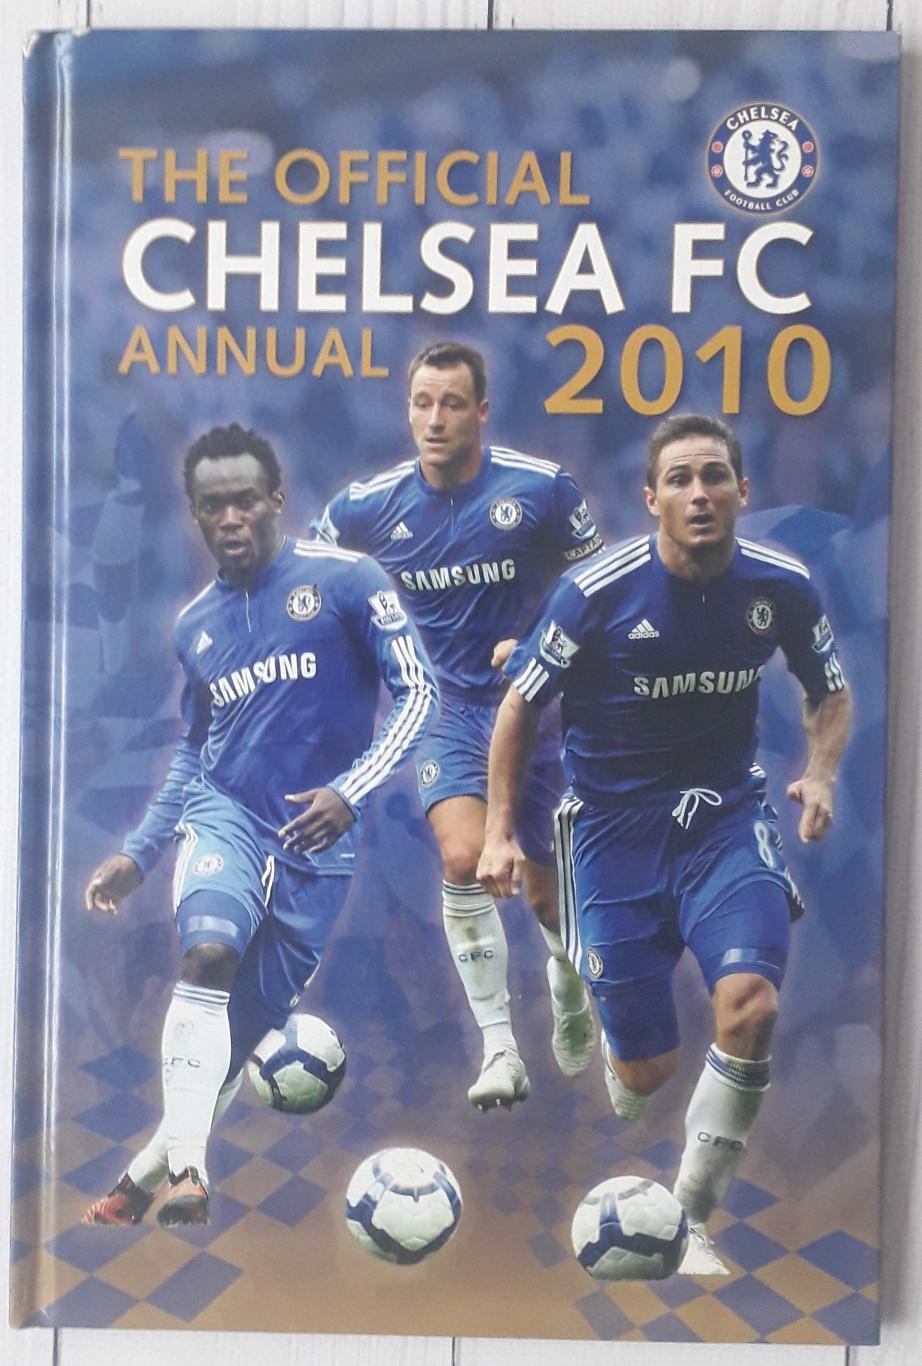 The Official Chelsea FC Annual 2010